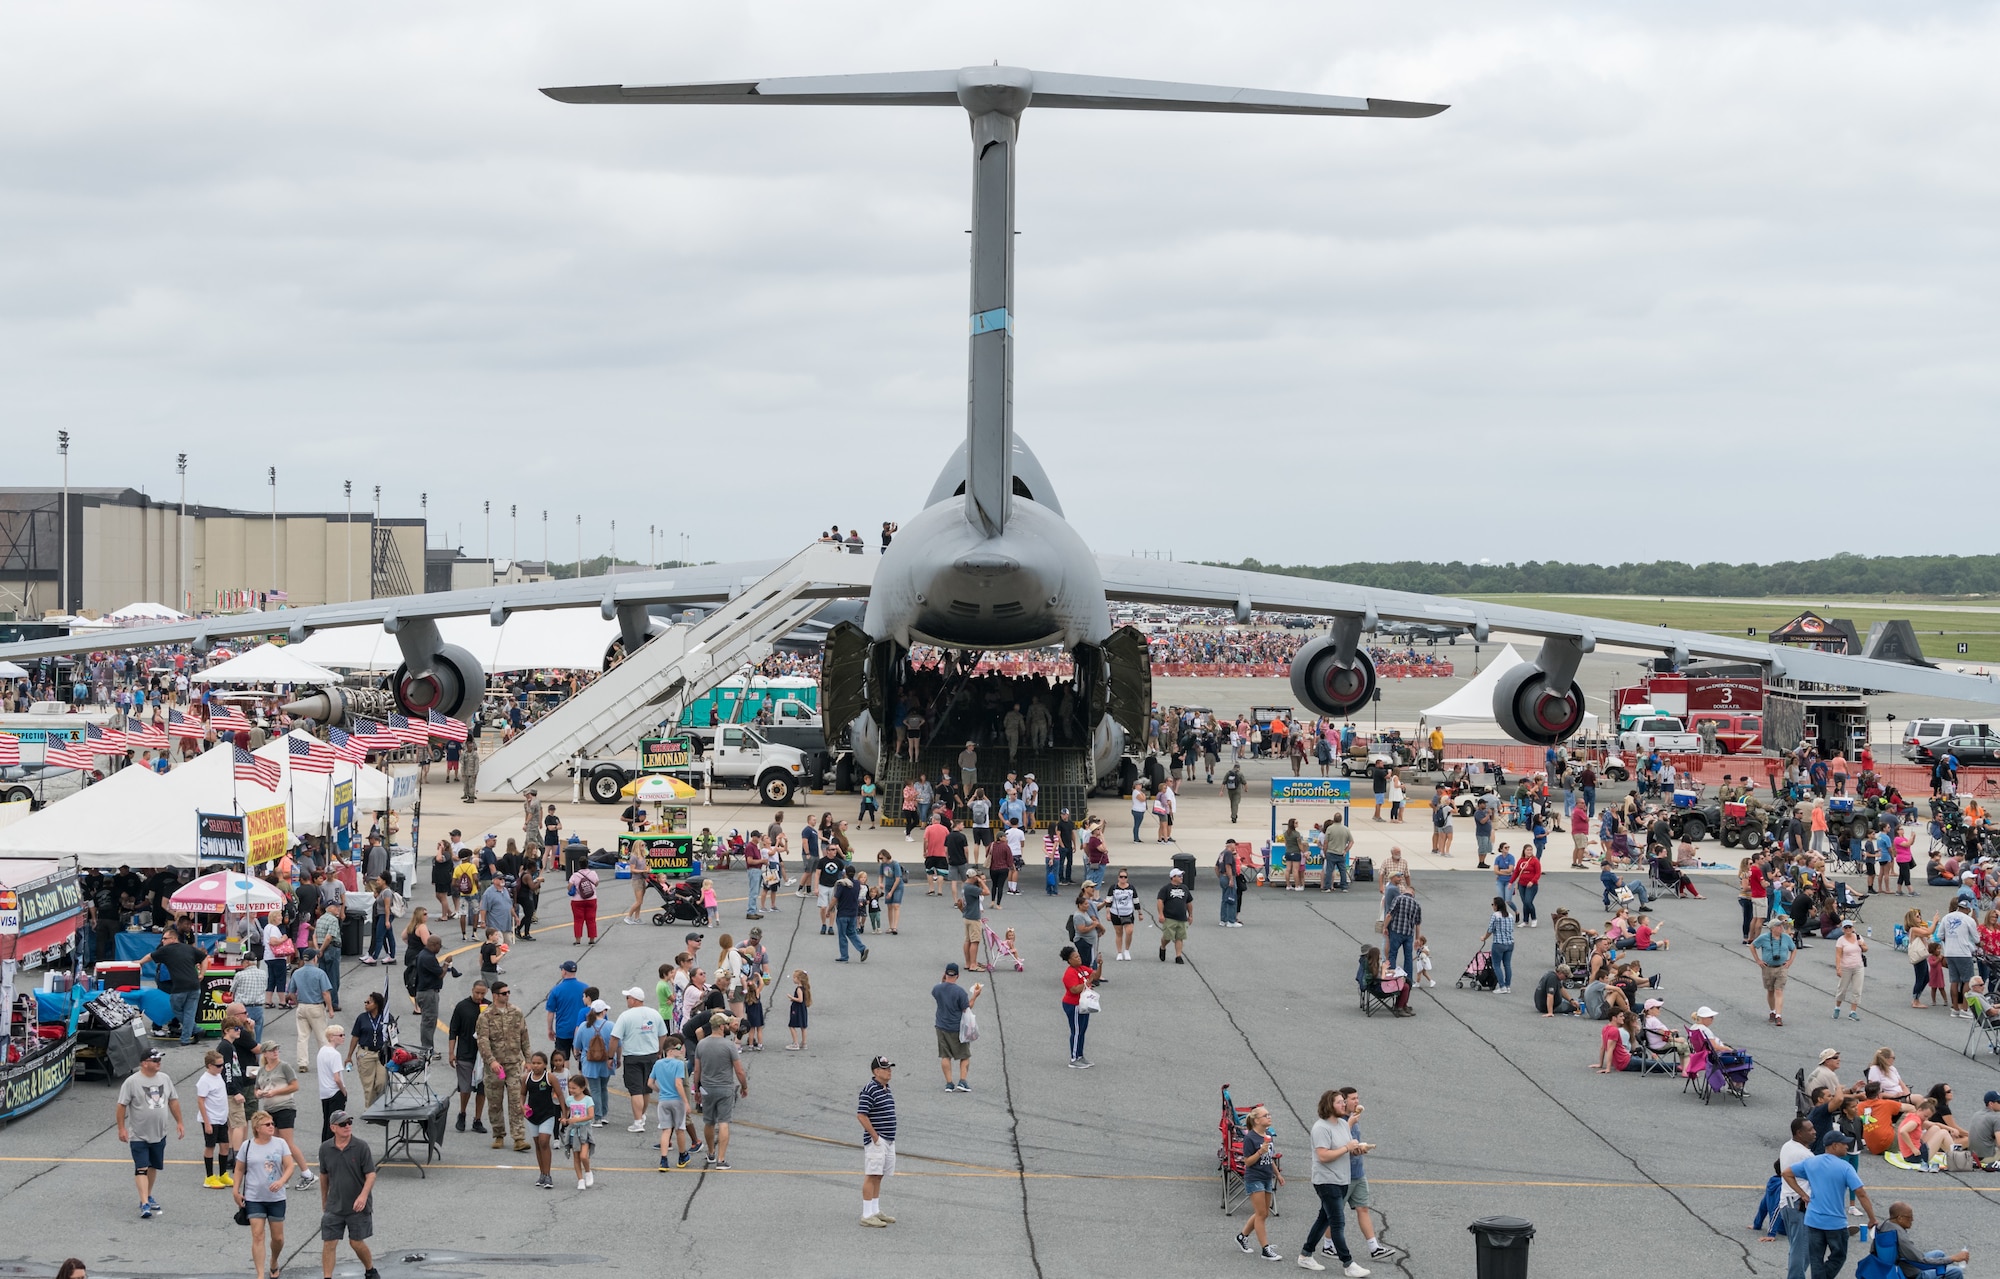 A C-5M Super Galaxy sits on the flight line during the 2019 Thunder Over Dover Air Show, Sept. 14, 2019, at Dover Air Force Base, Del. The event featured over 20 aircraft static displays, as well as numerous aerial demonstrations. (U.S. Air Force photo by Roland Balik)